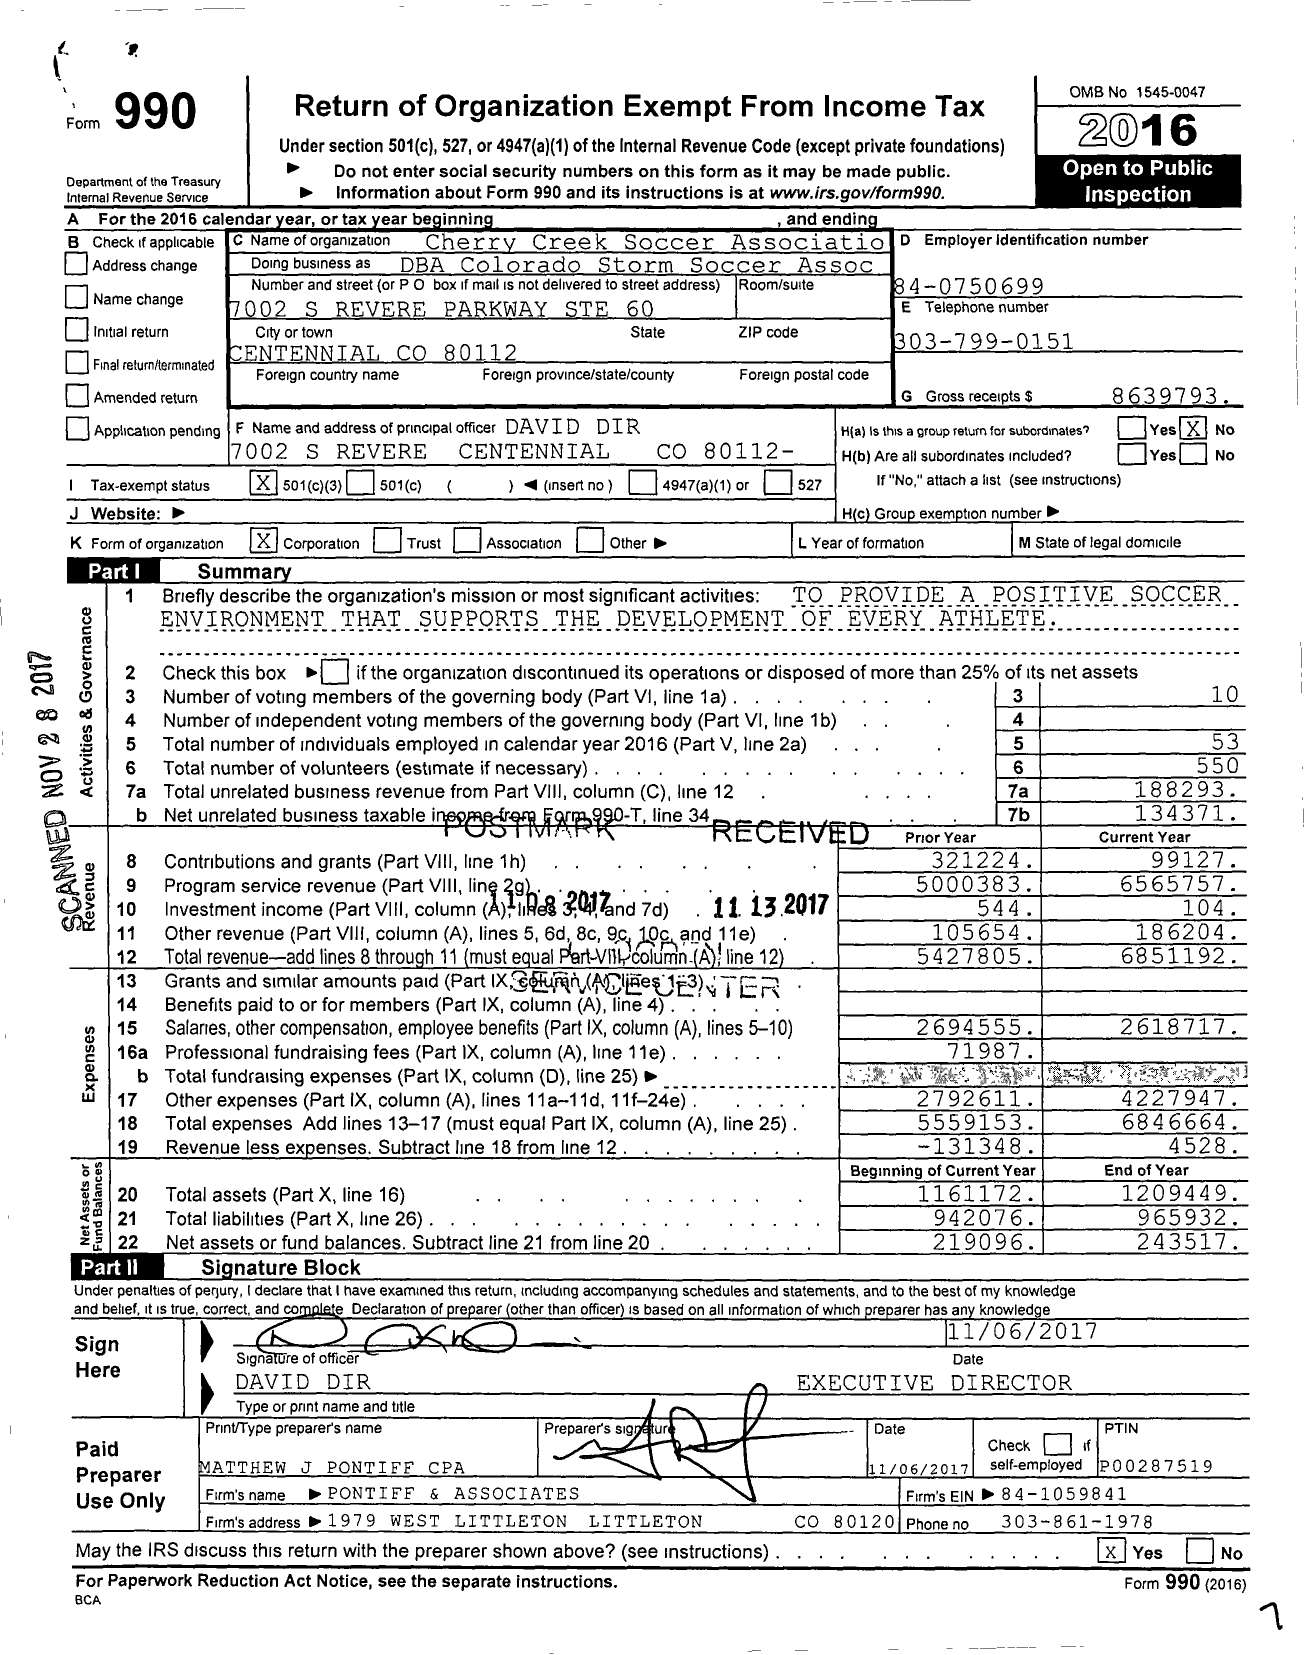 Image of first page of 2016 Form 990 for Cherry Creek Soccer Association